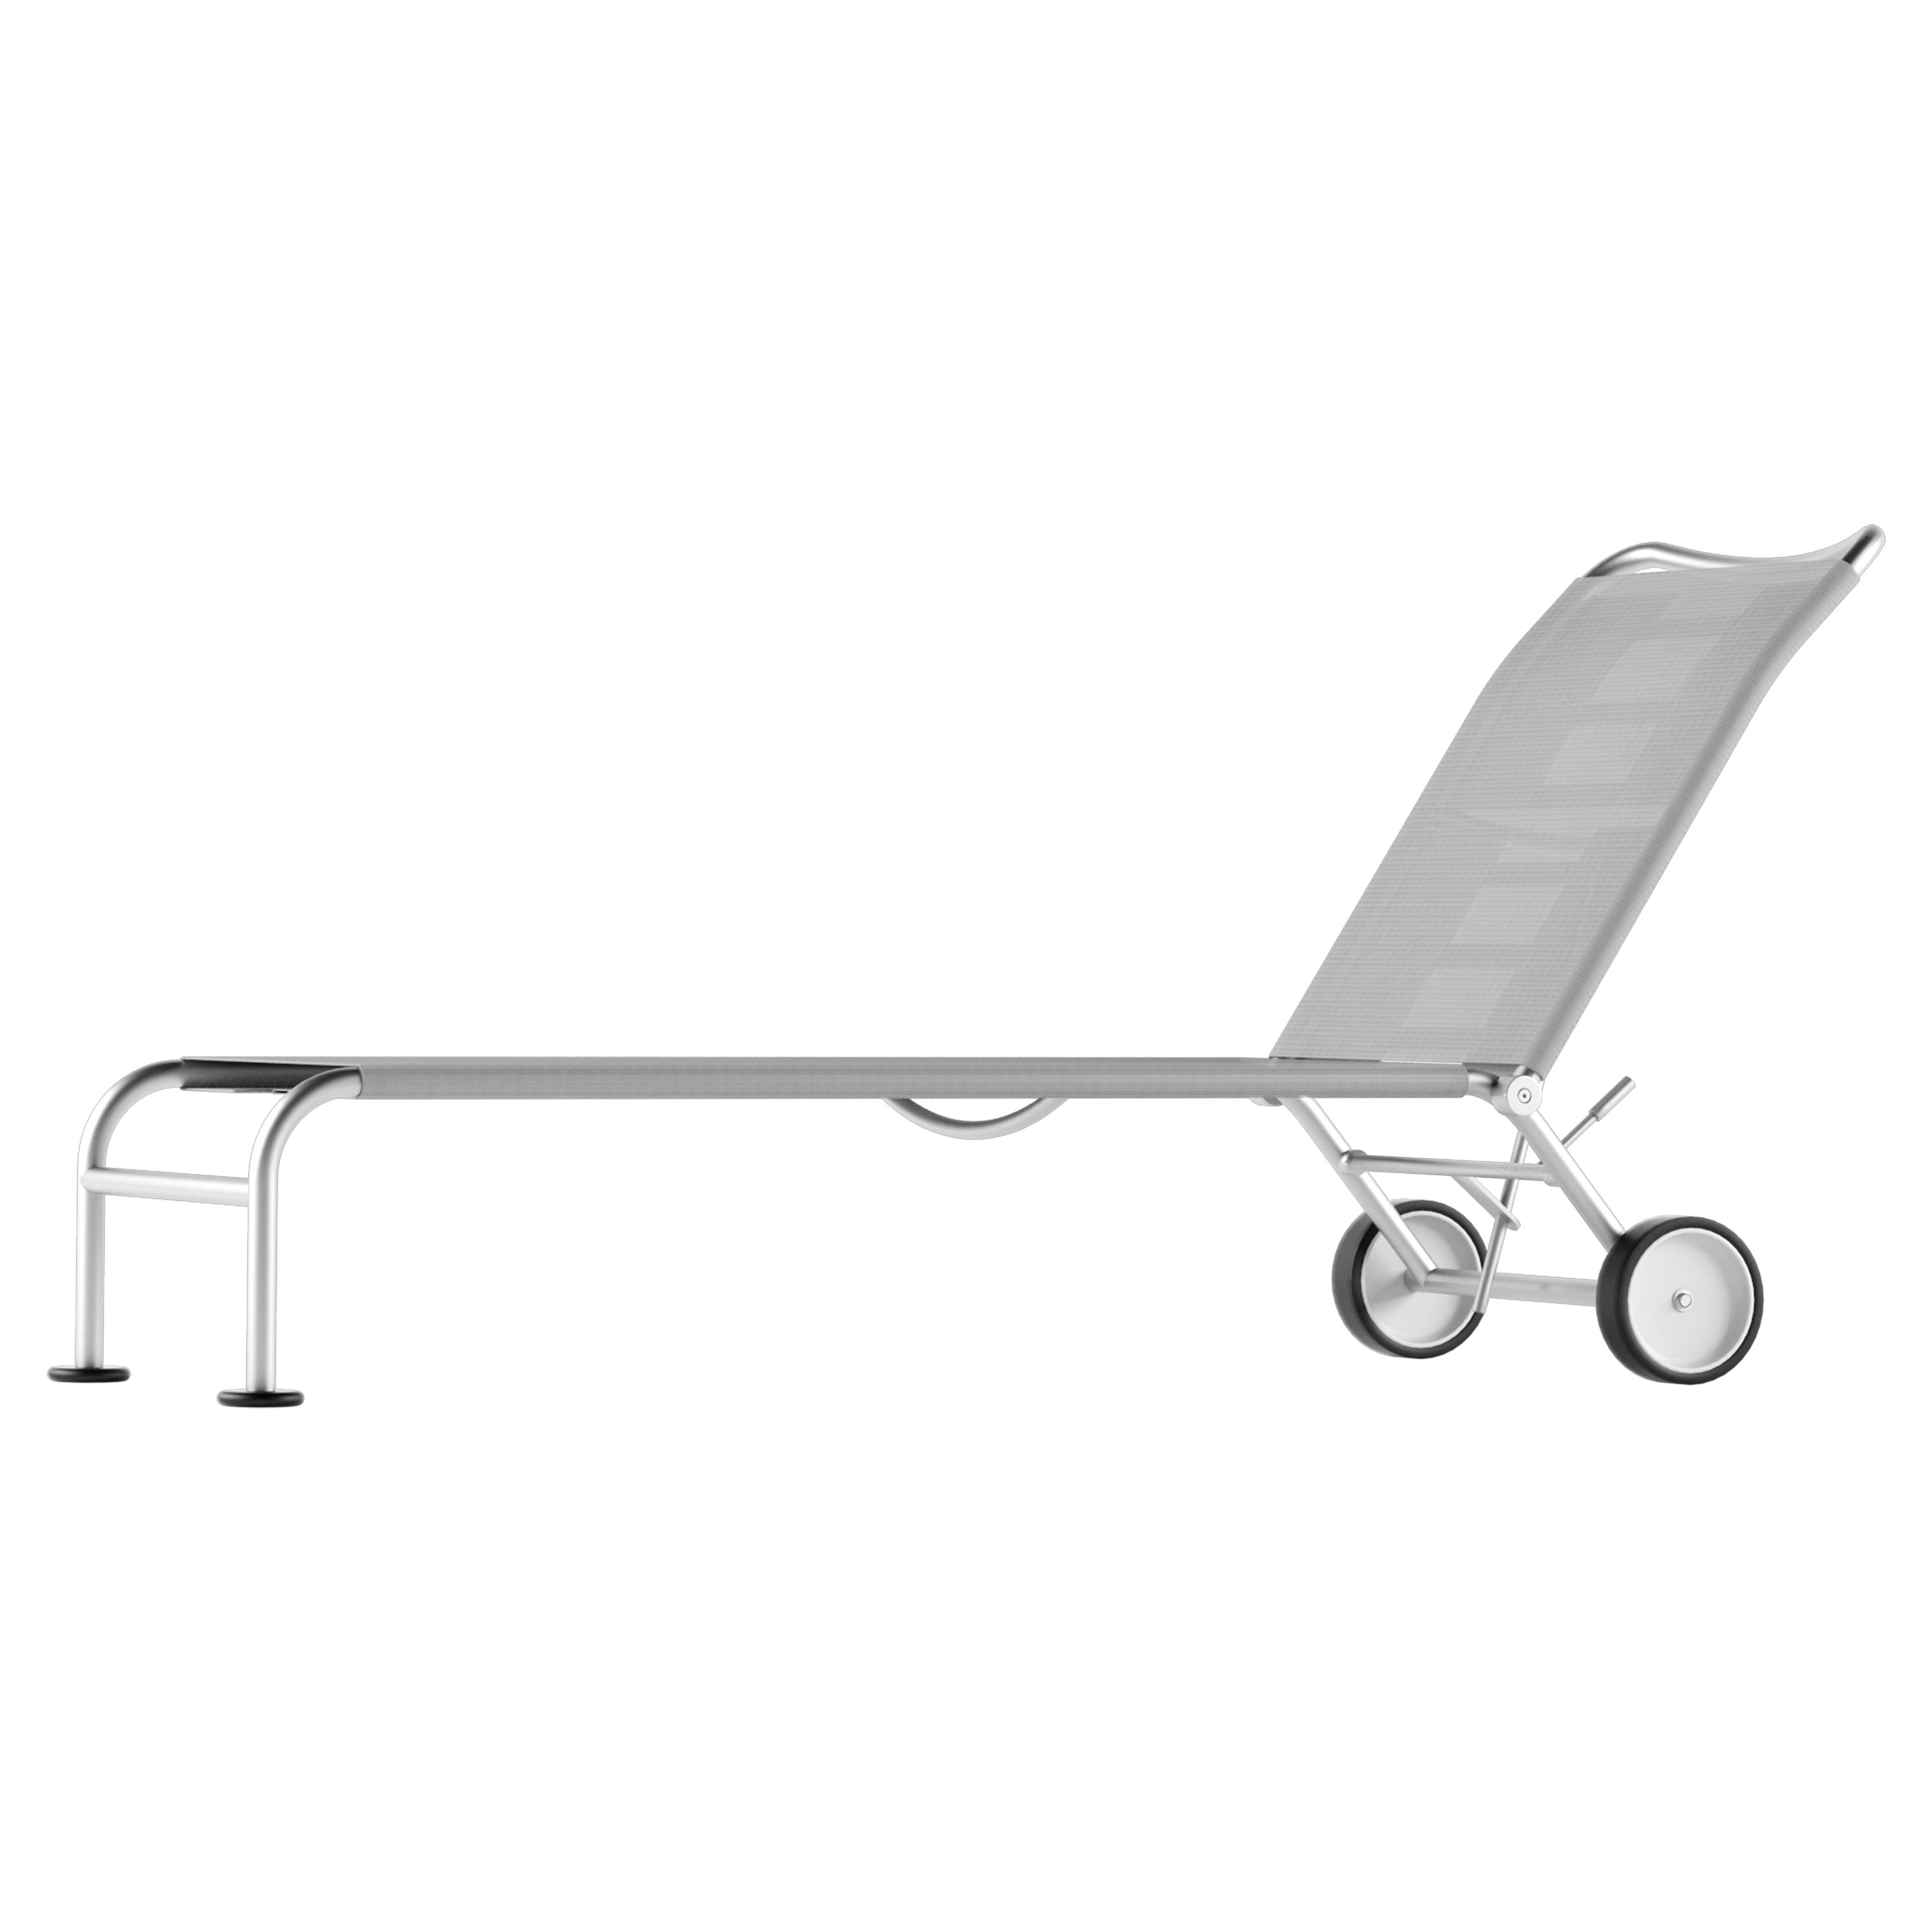 Alias 251_O Green Sun Lounger Chair in Light Grey with Steel Frame For Sale